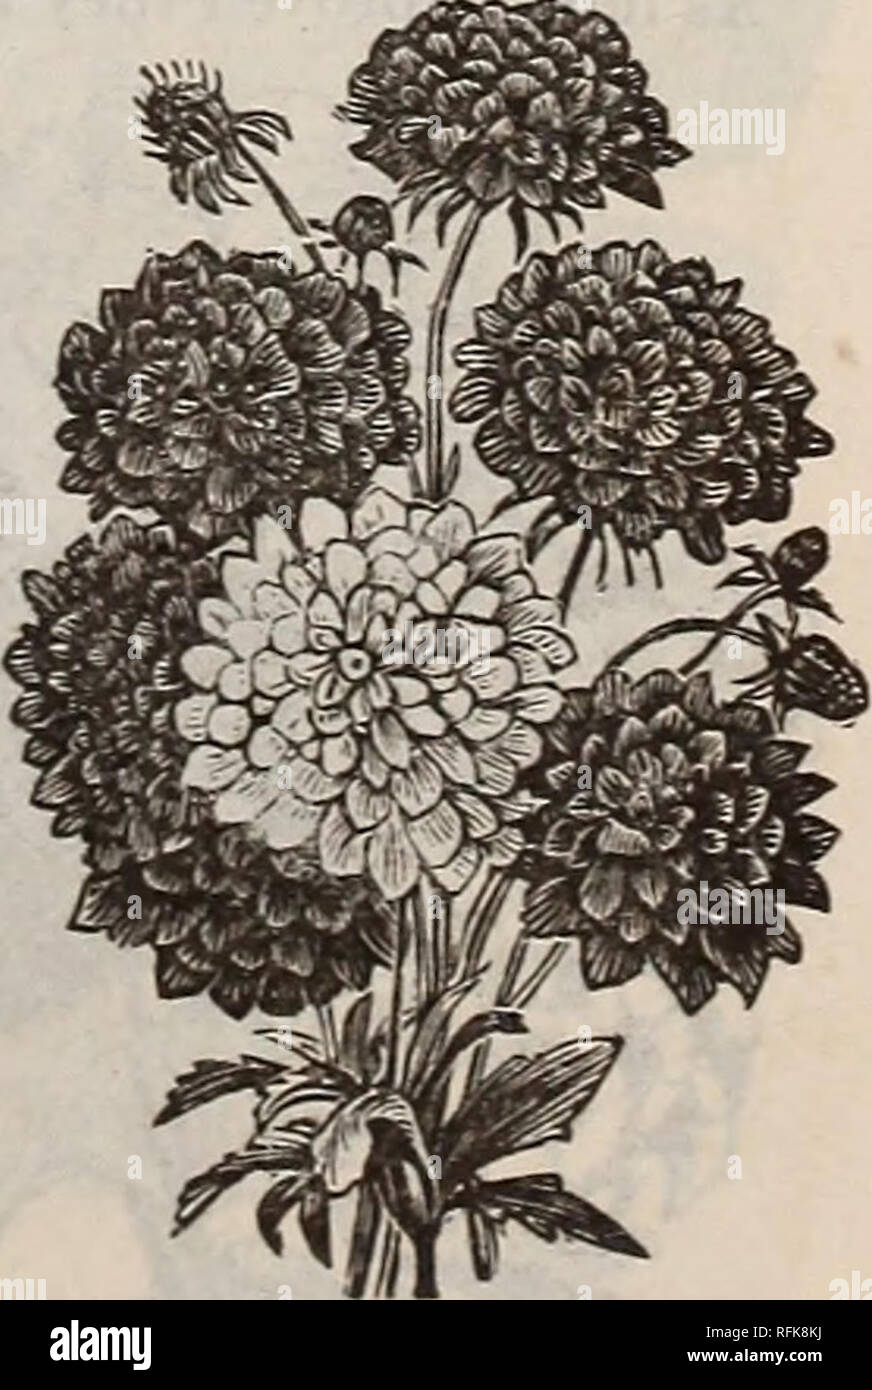 . Burpee's farm annual written at Fordhook Farm. Nurseries (Horticulture) Pennsylvania Philadelphia Catalogs; Vegetables Seeds Catalogs; Plants, Ornamental Catalogs; Flowers Seeds Catalogs. PRIMULA FIMBRIATA—SINGLE CHINESE PRIMROSE. PRIMULA SINENSIS FIMBRIATA. FRINGED CHINESE PRIMROSE. The Chinese Primrose is the most beautiful and satisfac- tory of all house plants for winter blooming, and is as easily grown as a Geranium. They are raised so easily that every flower-lover should hare a magnificent display of these brightest and best of all winter flowers in the house. Our seed is saved from t Stock Photo